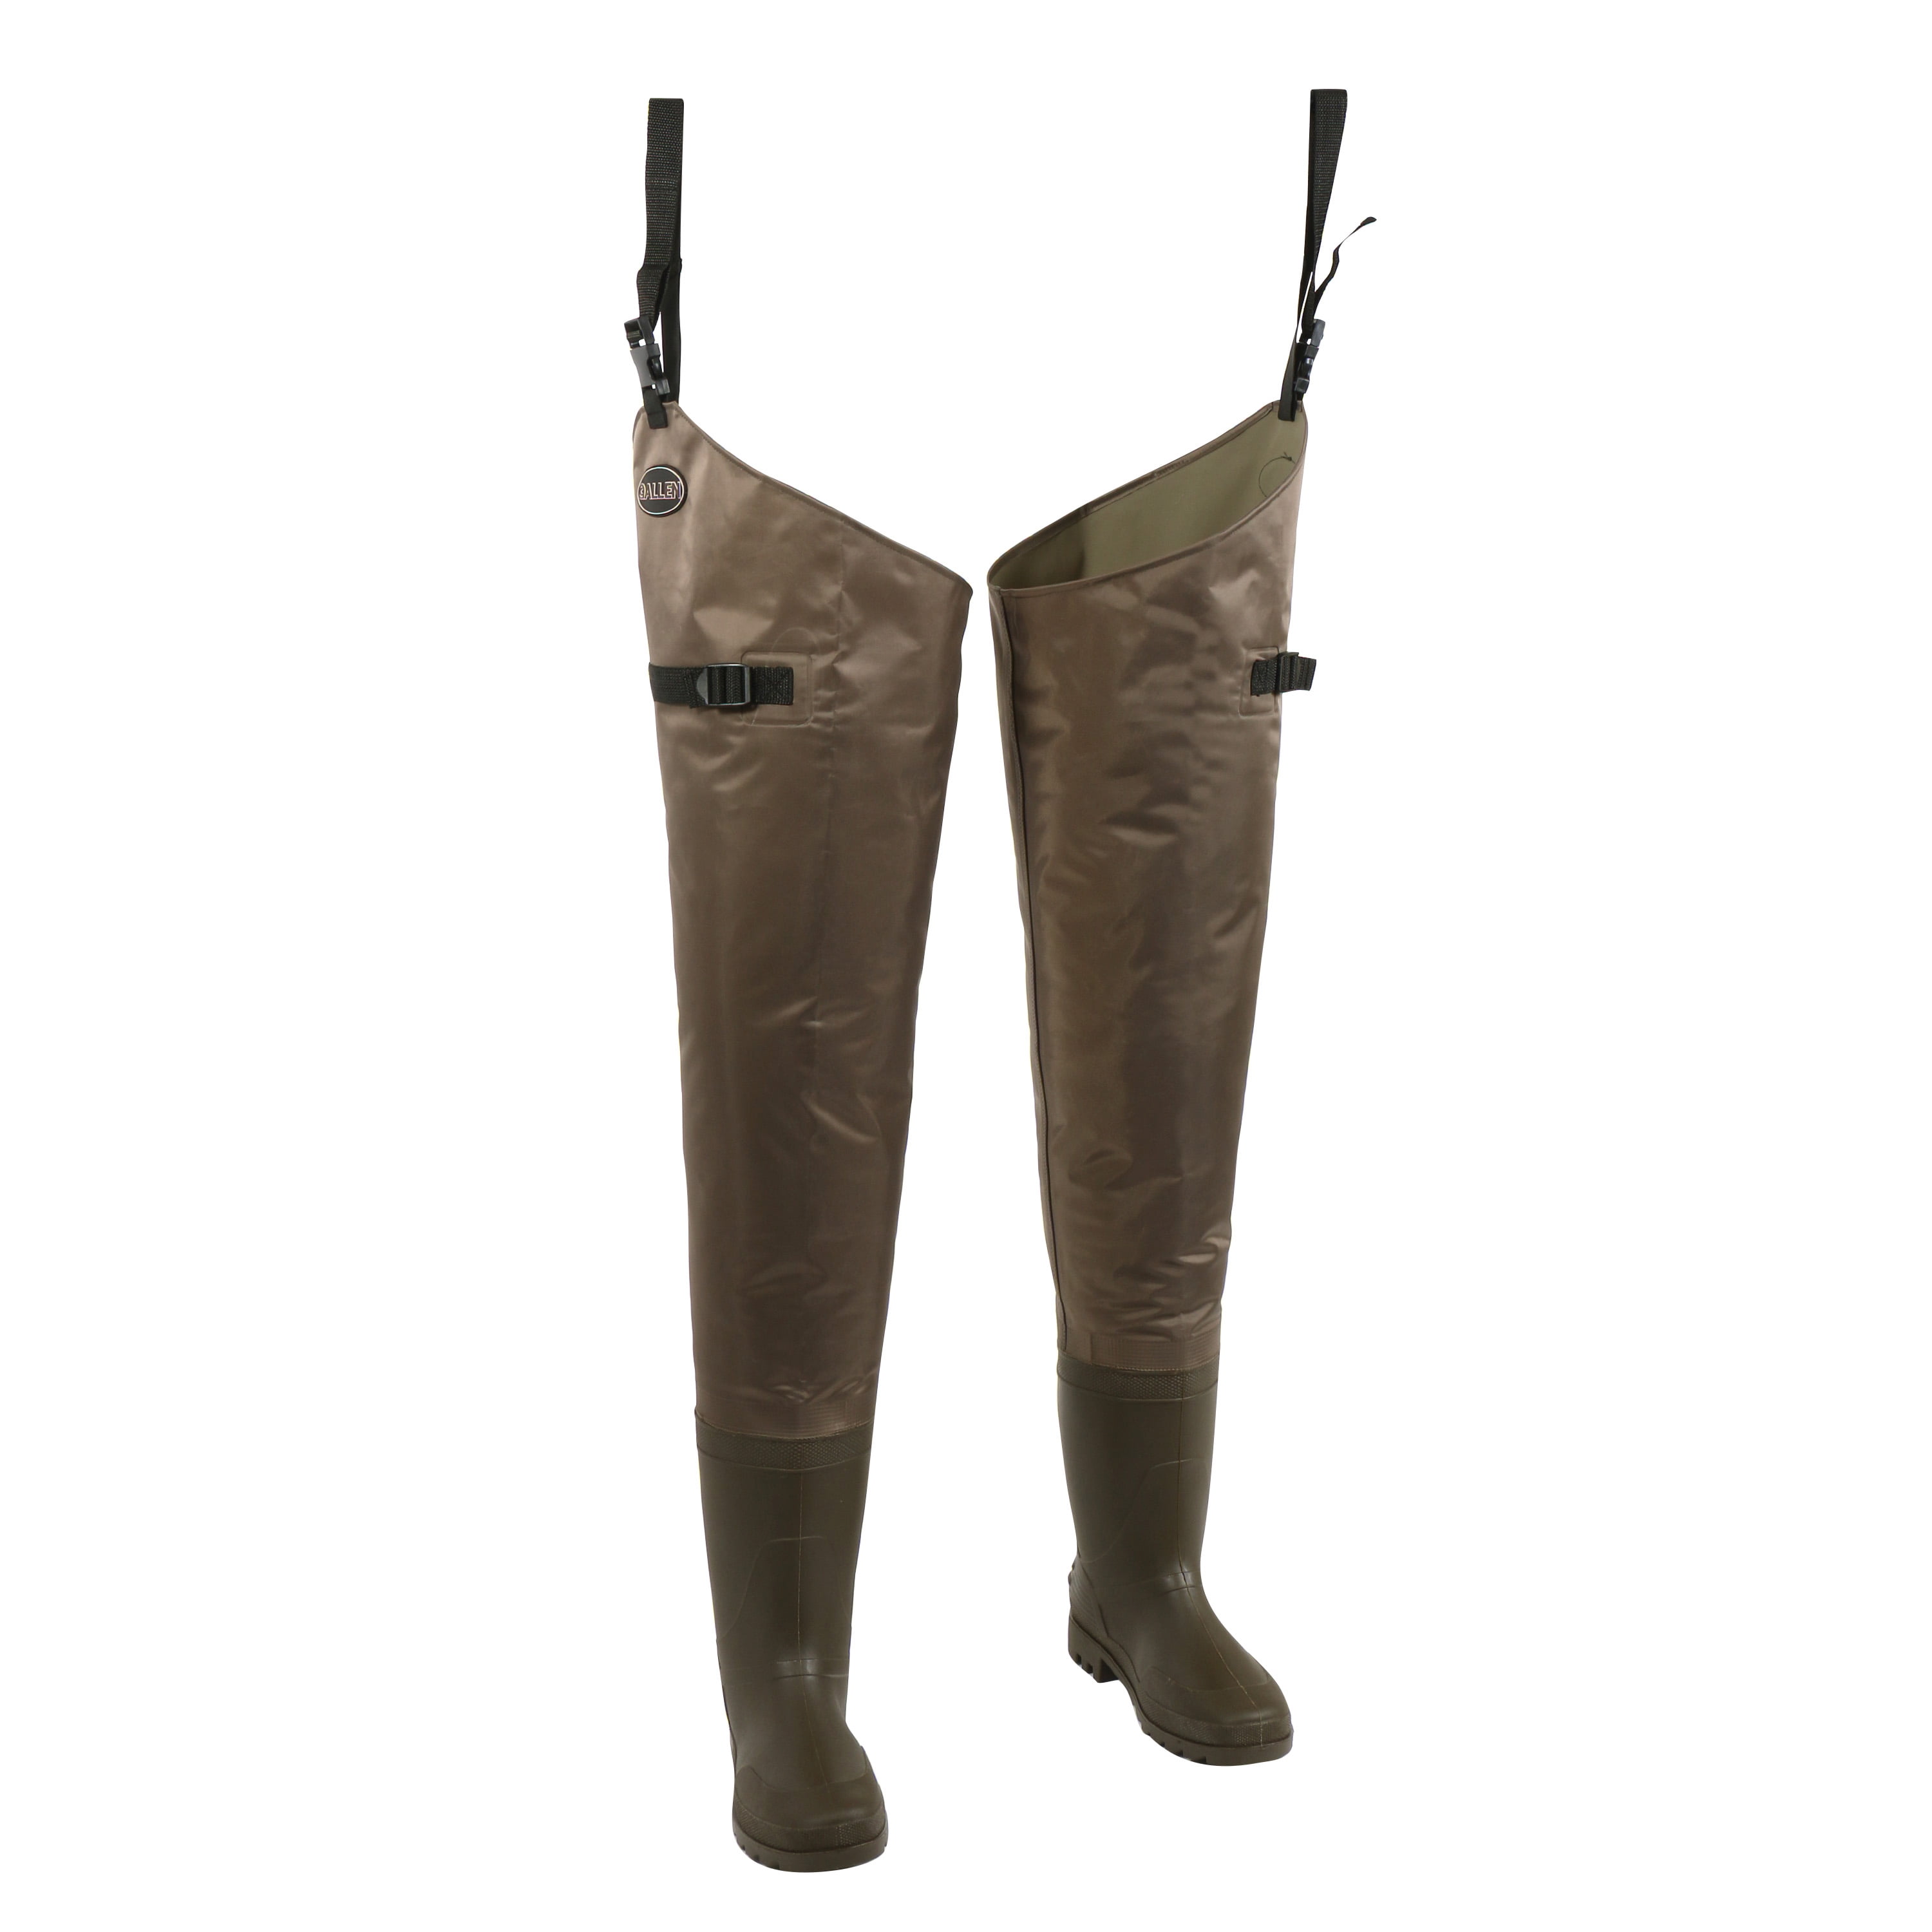 Allen Company Black River Hip Fishing Waders, Size 7, Chocolate